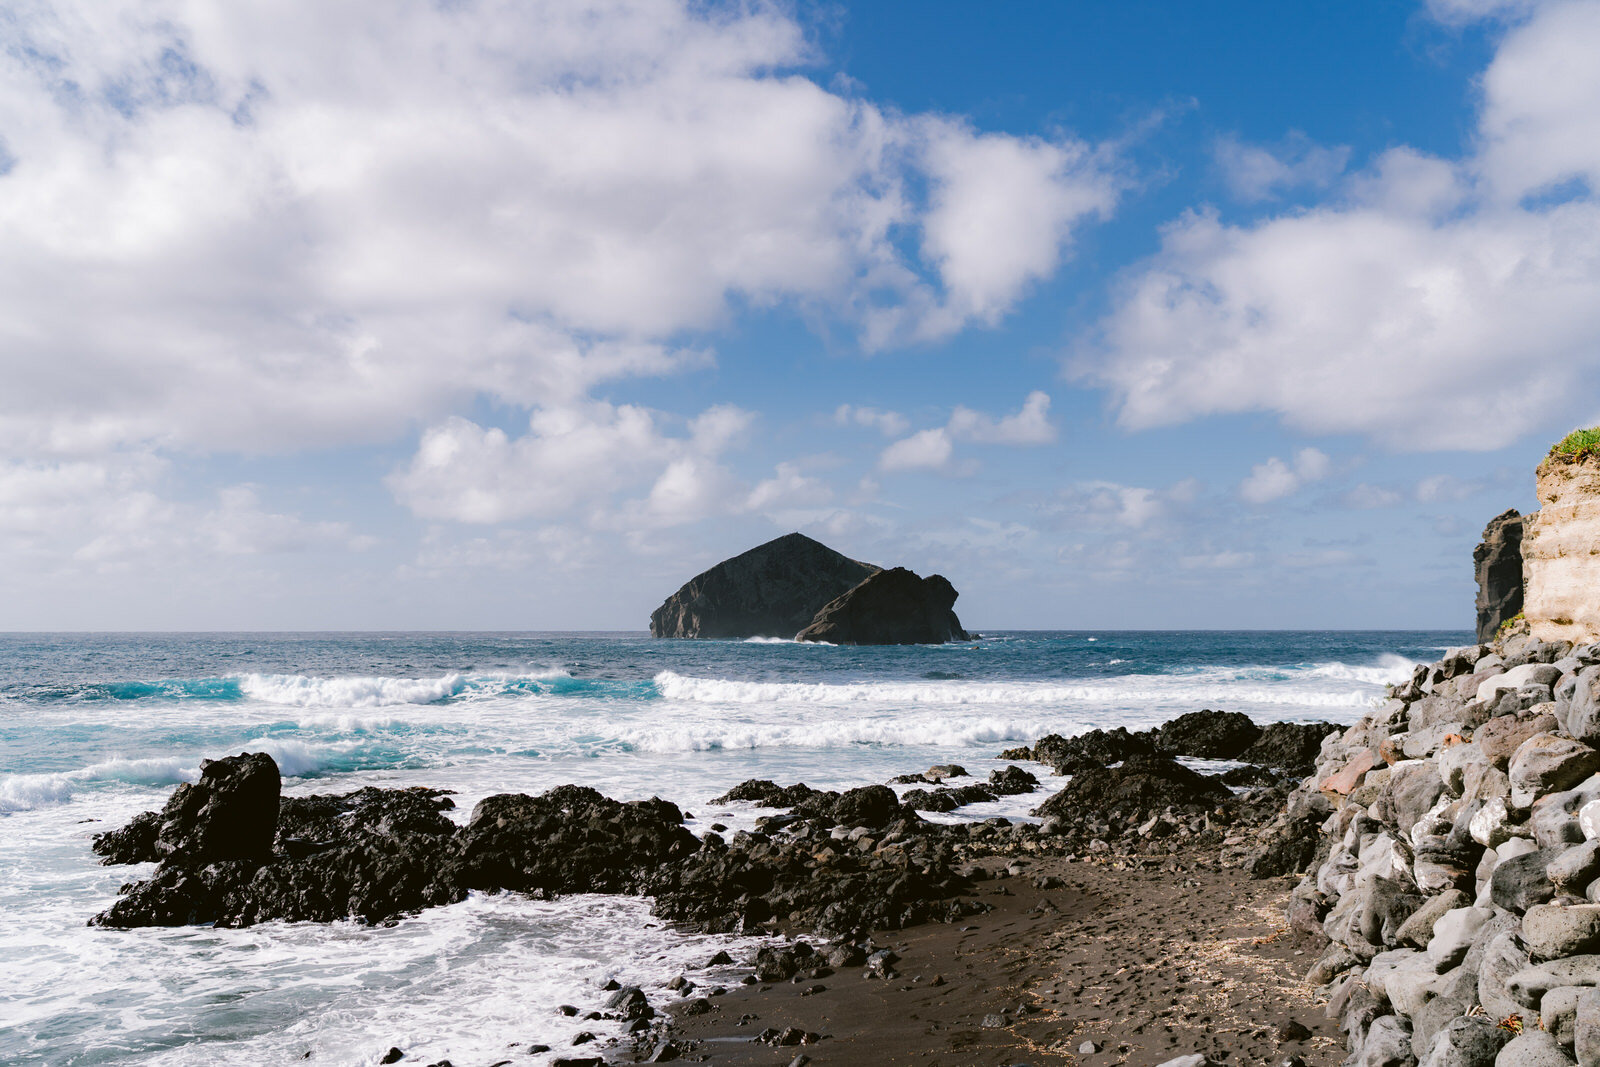 Elopement in the Azores. Cpuple getting married in Portugal. Elopement photography in Europe. Epic locations to elope in the world. Sao Miquel island Azores wedding (1).jpg